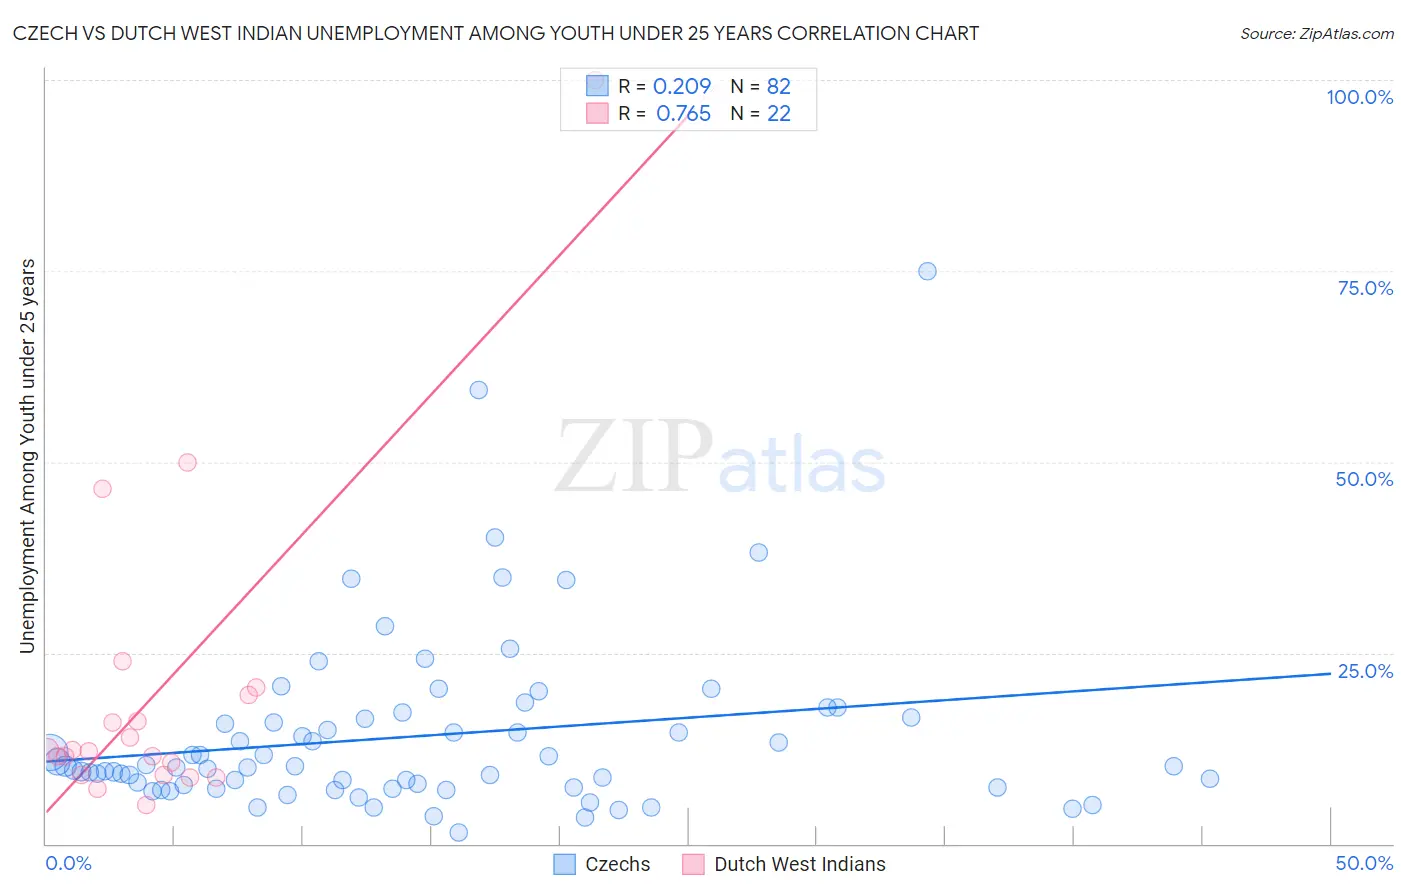 Czech vs Dutch West Indian Unemployment Among Youth under 25 years